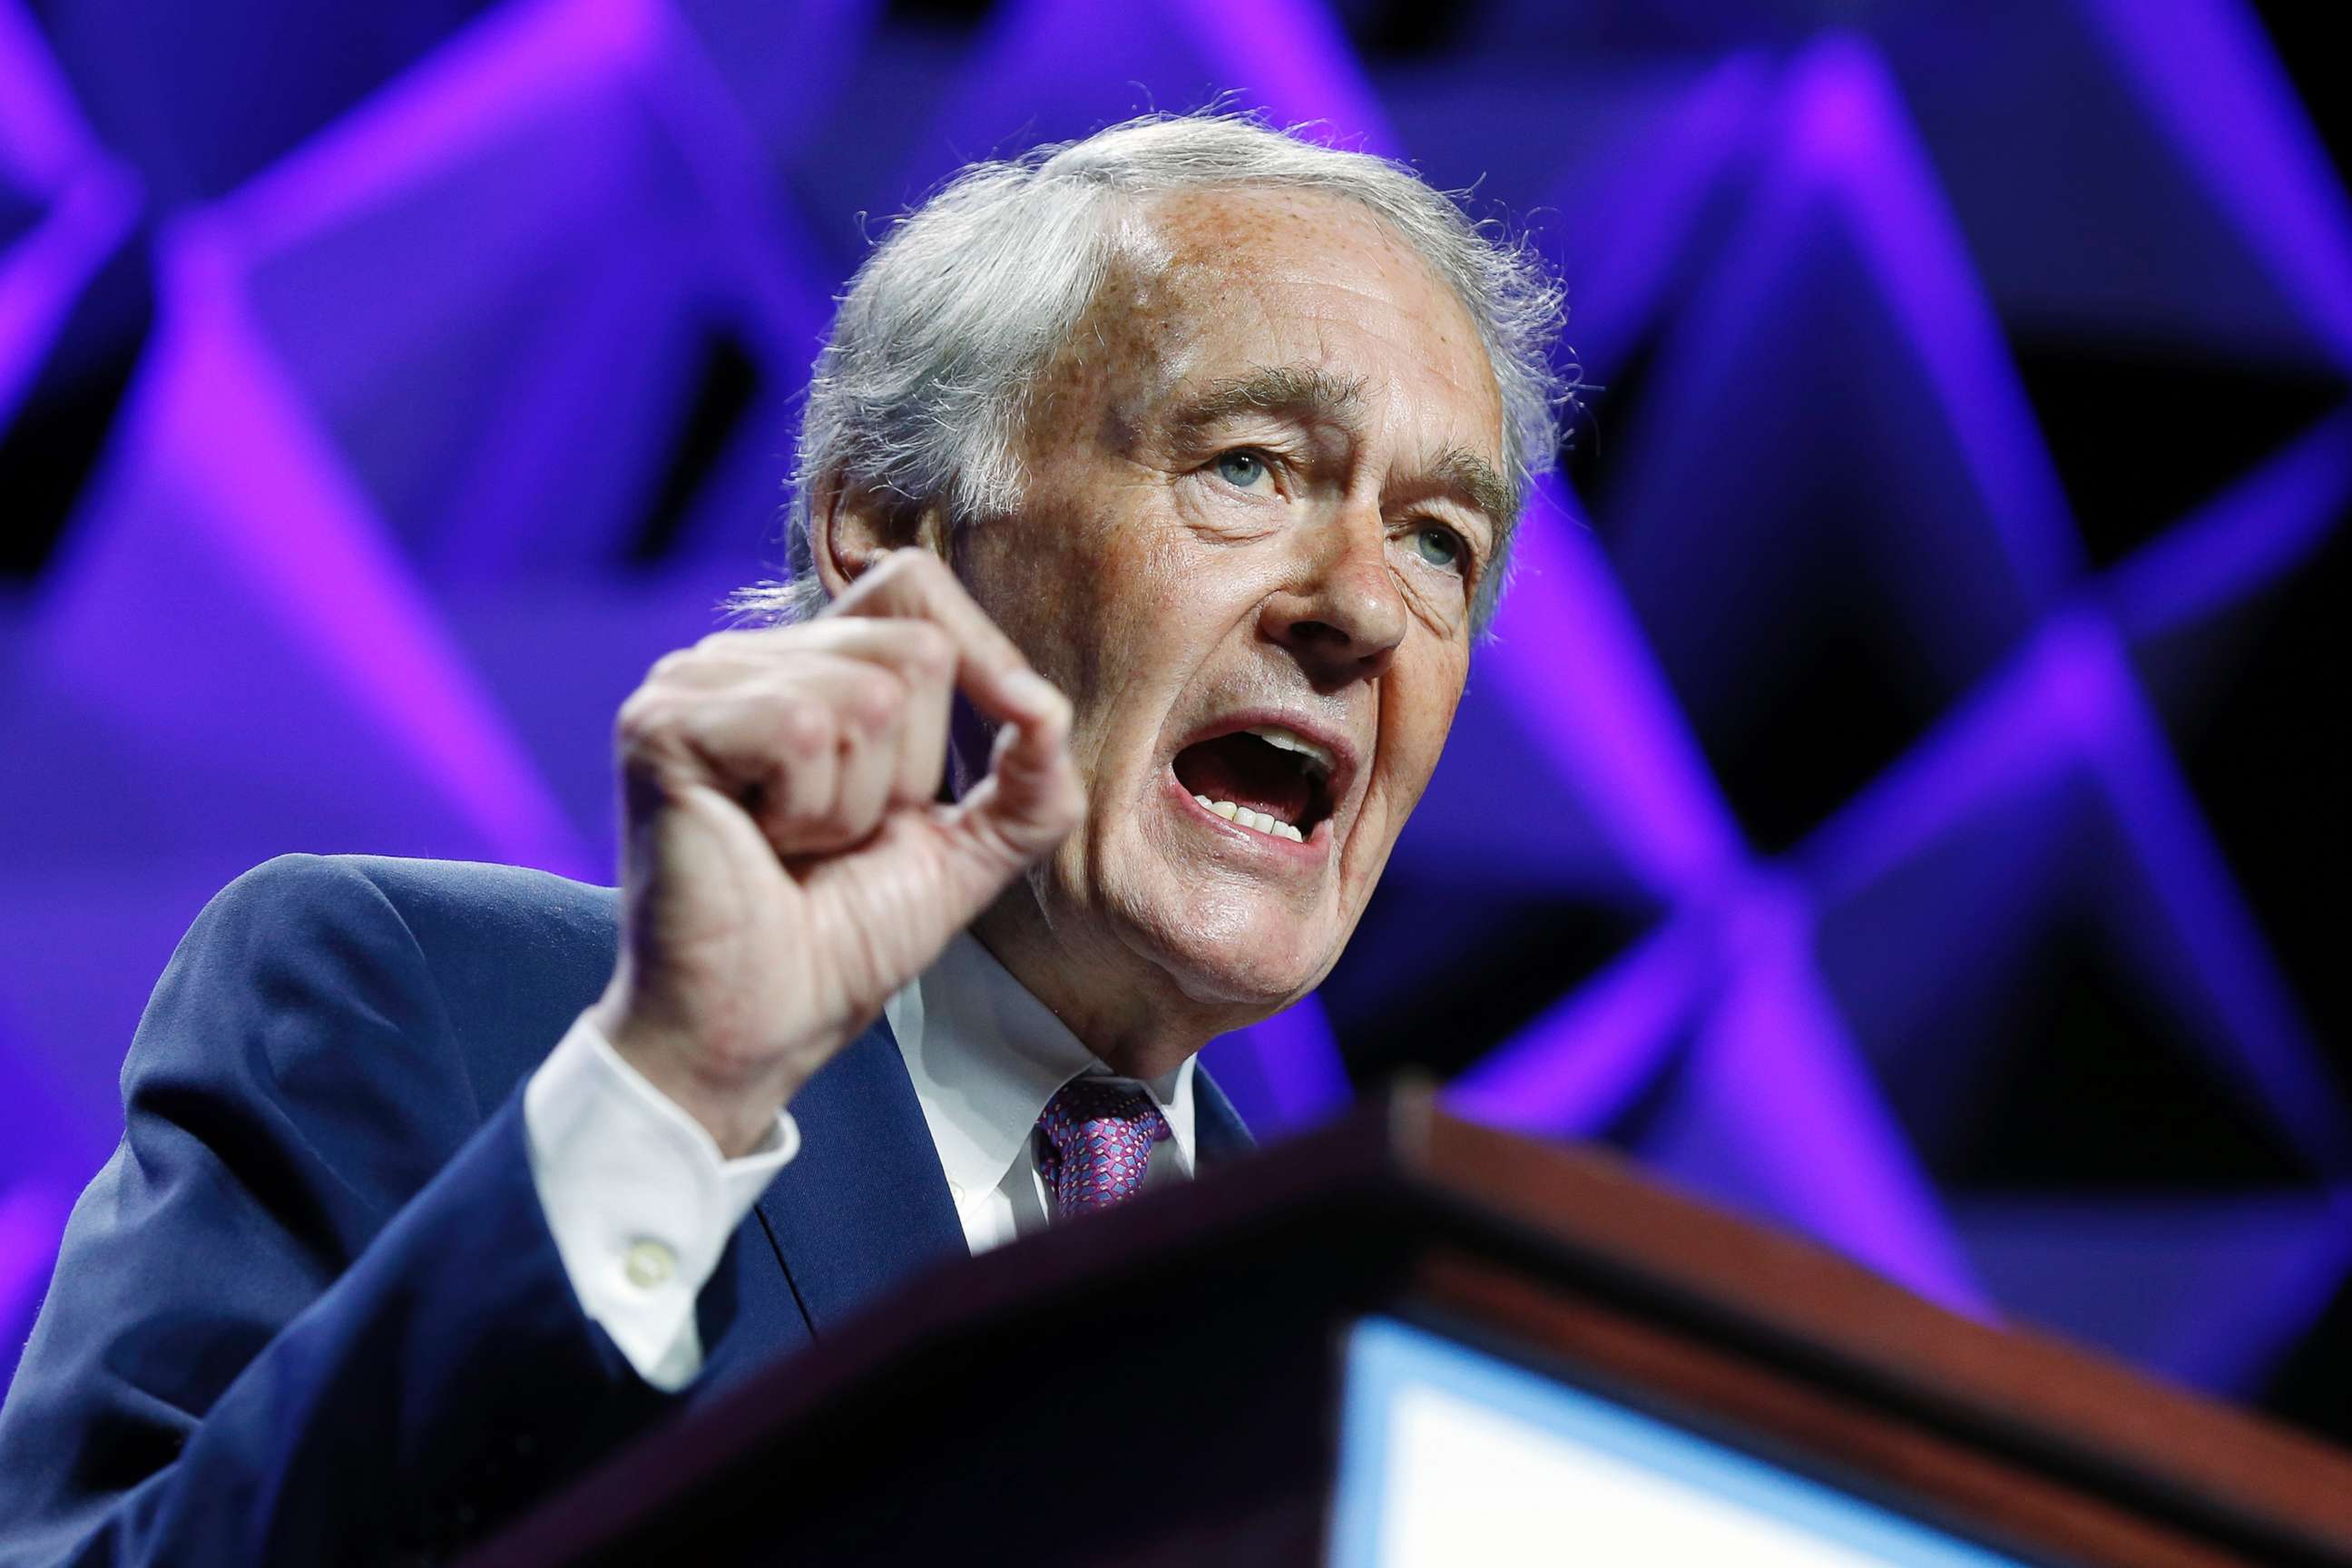 PHOTO: Sen. Ed Markey speaks during the 2018 Massachusetts Democratic Party Convention, June 2, 2018, in Worcester, Mass.